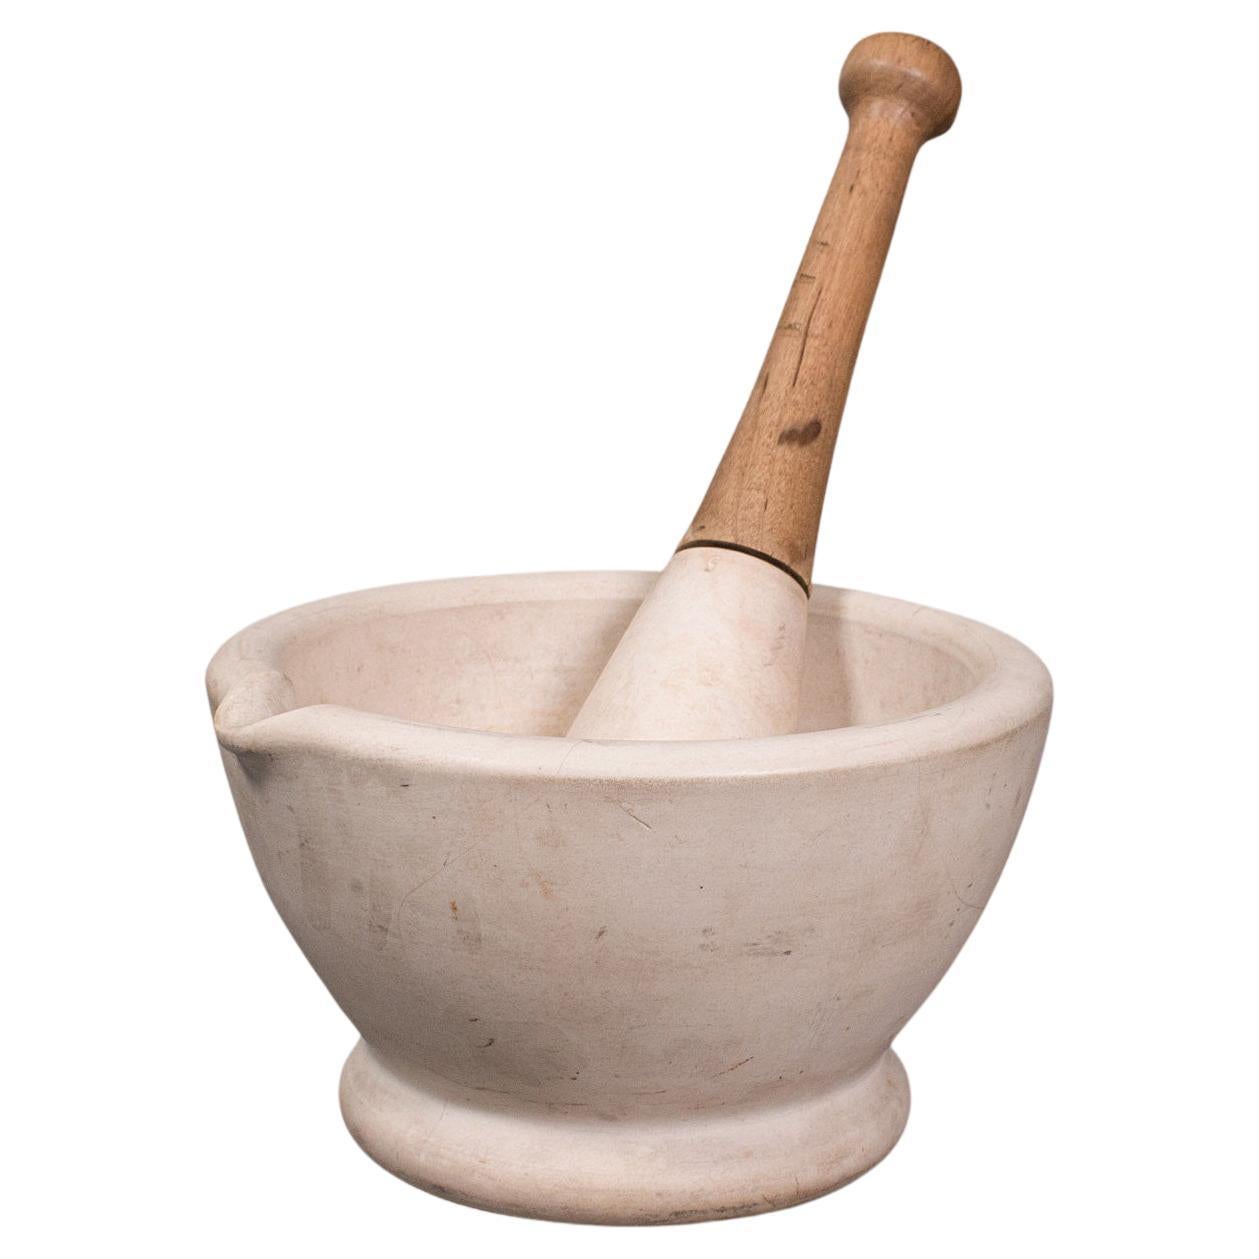 Antique Mortar and Pestle, English, Ceramic, Apothecary, Cookery Tool, Victorian For Sale